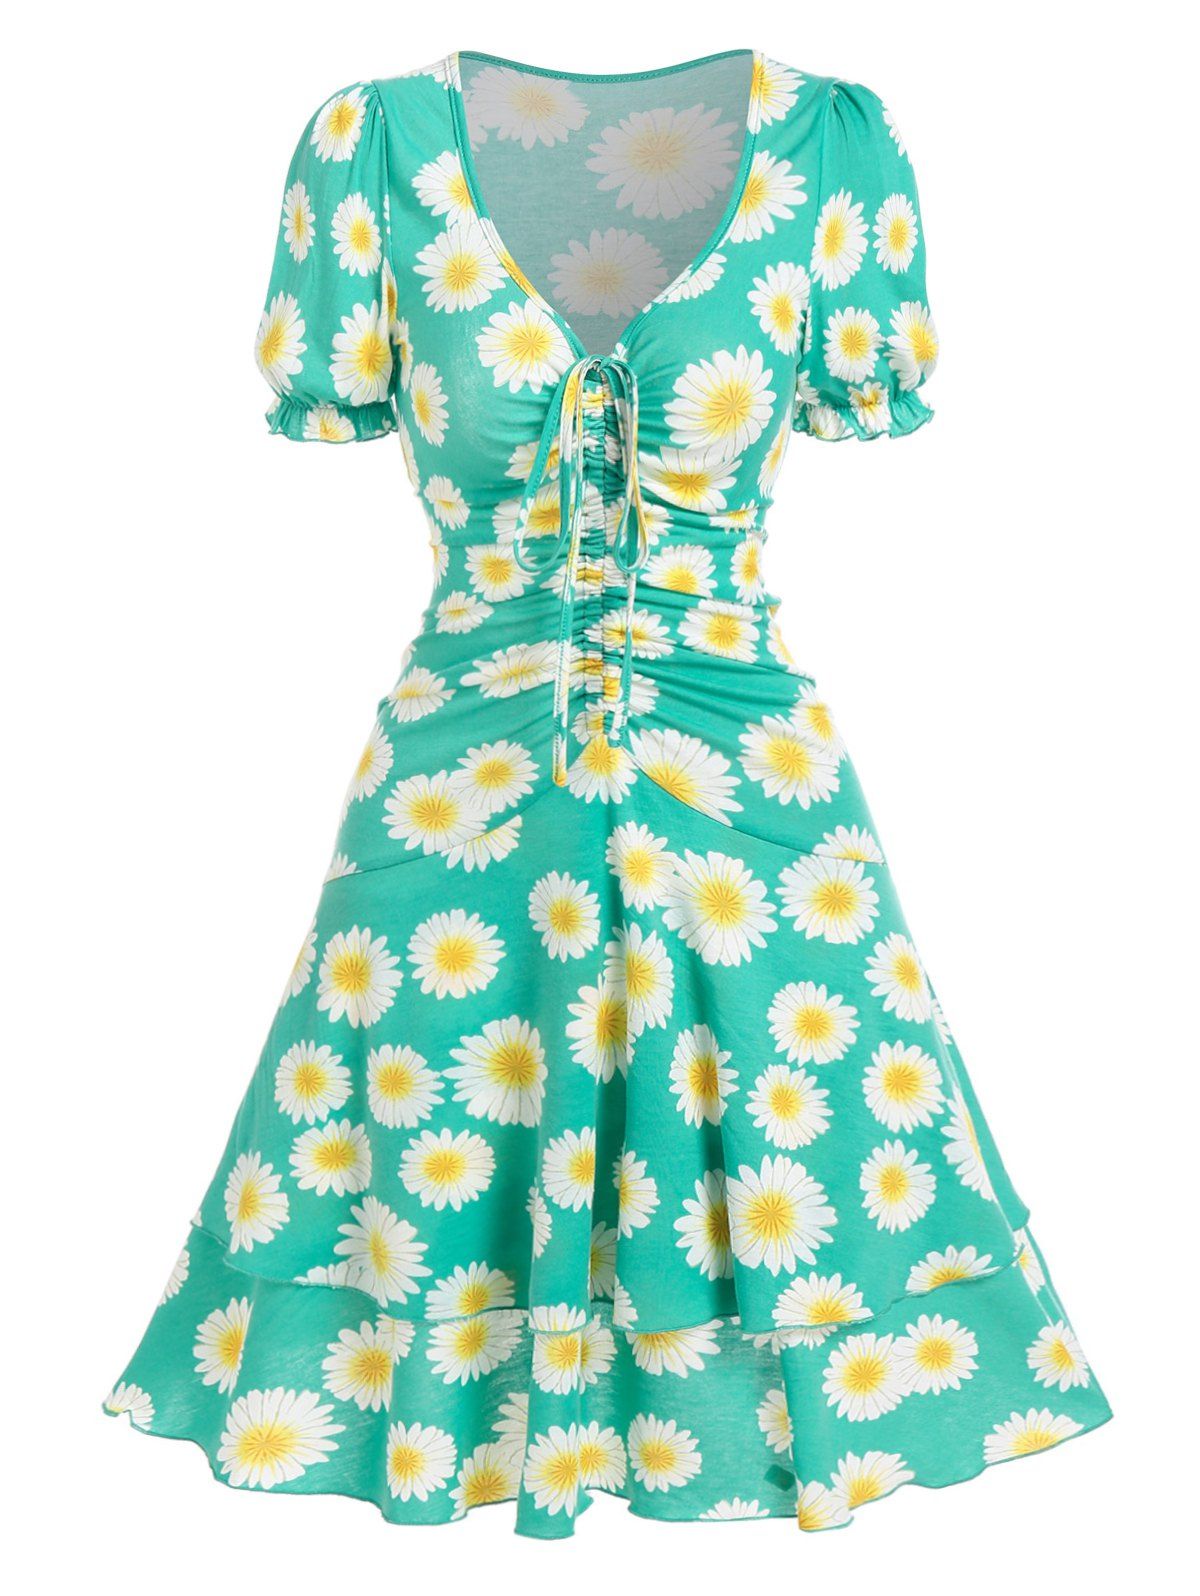 Daisy Floral Cinched Ruched Puff Sleeve Layered A Line Dress - GREEN XL